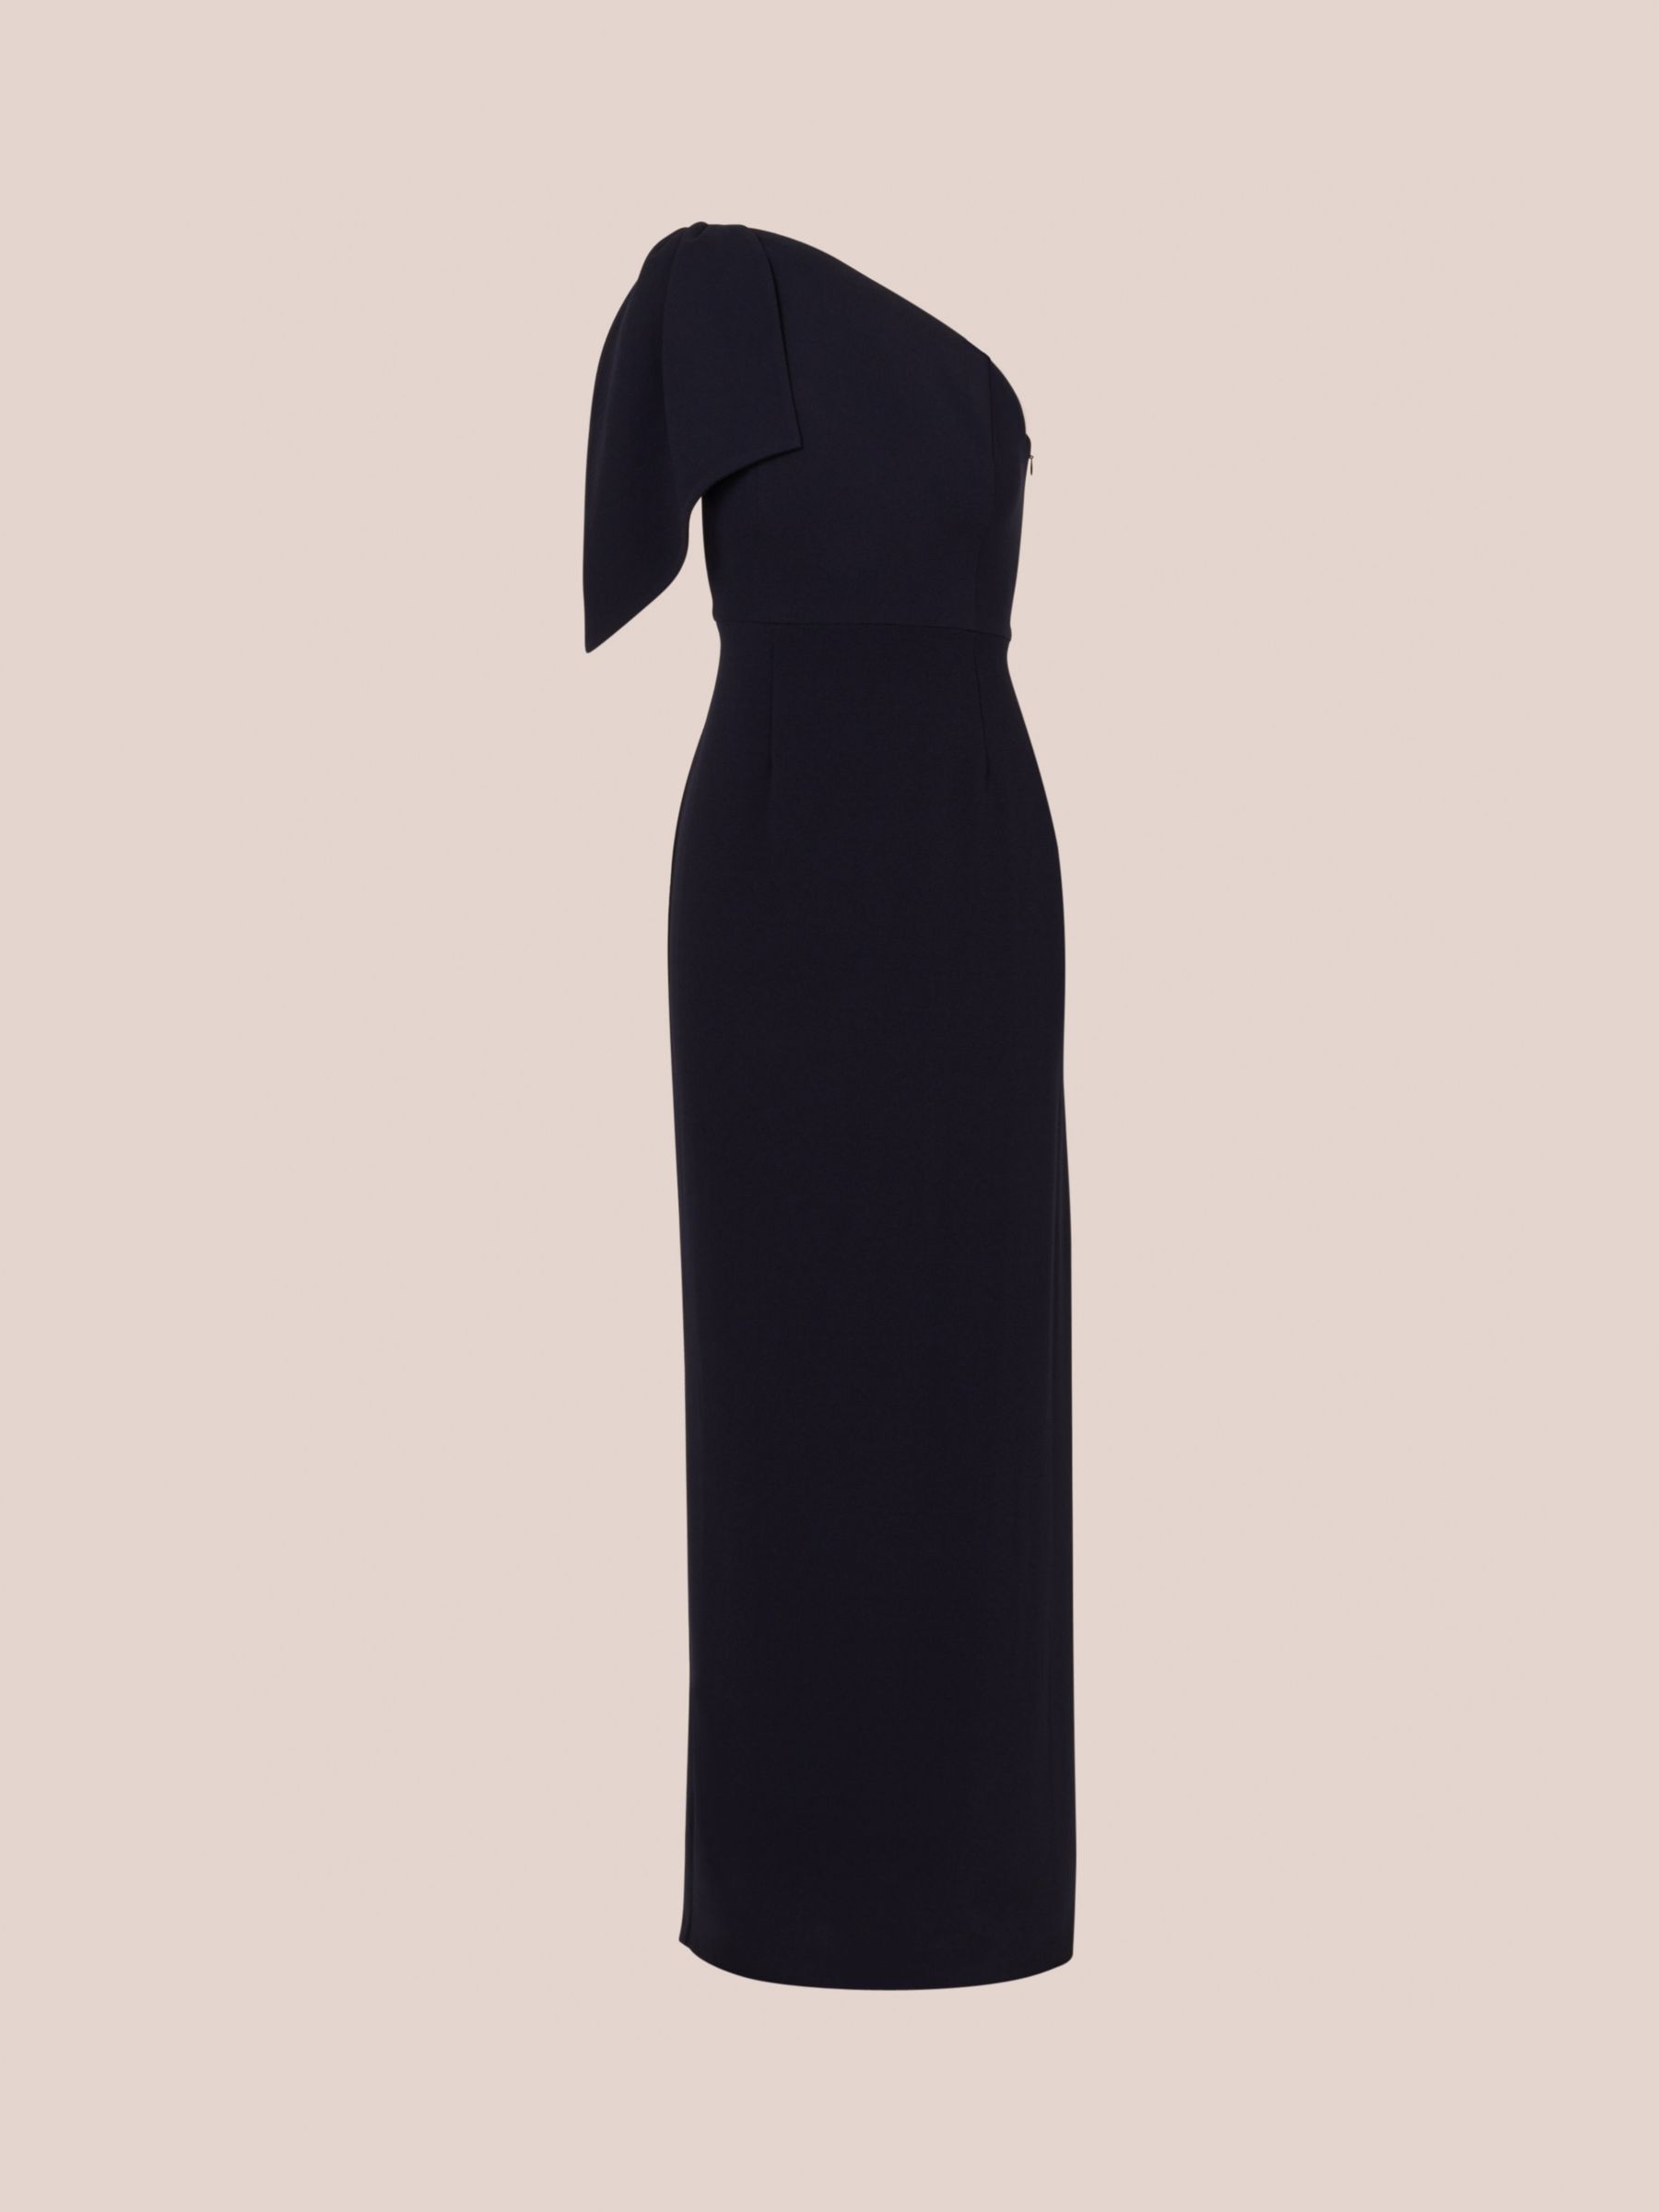 Buy Adrianna Papell Crepe Asymmetric Bow Maxi Dress, Midnight Online at johnlewis.com